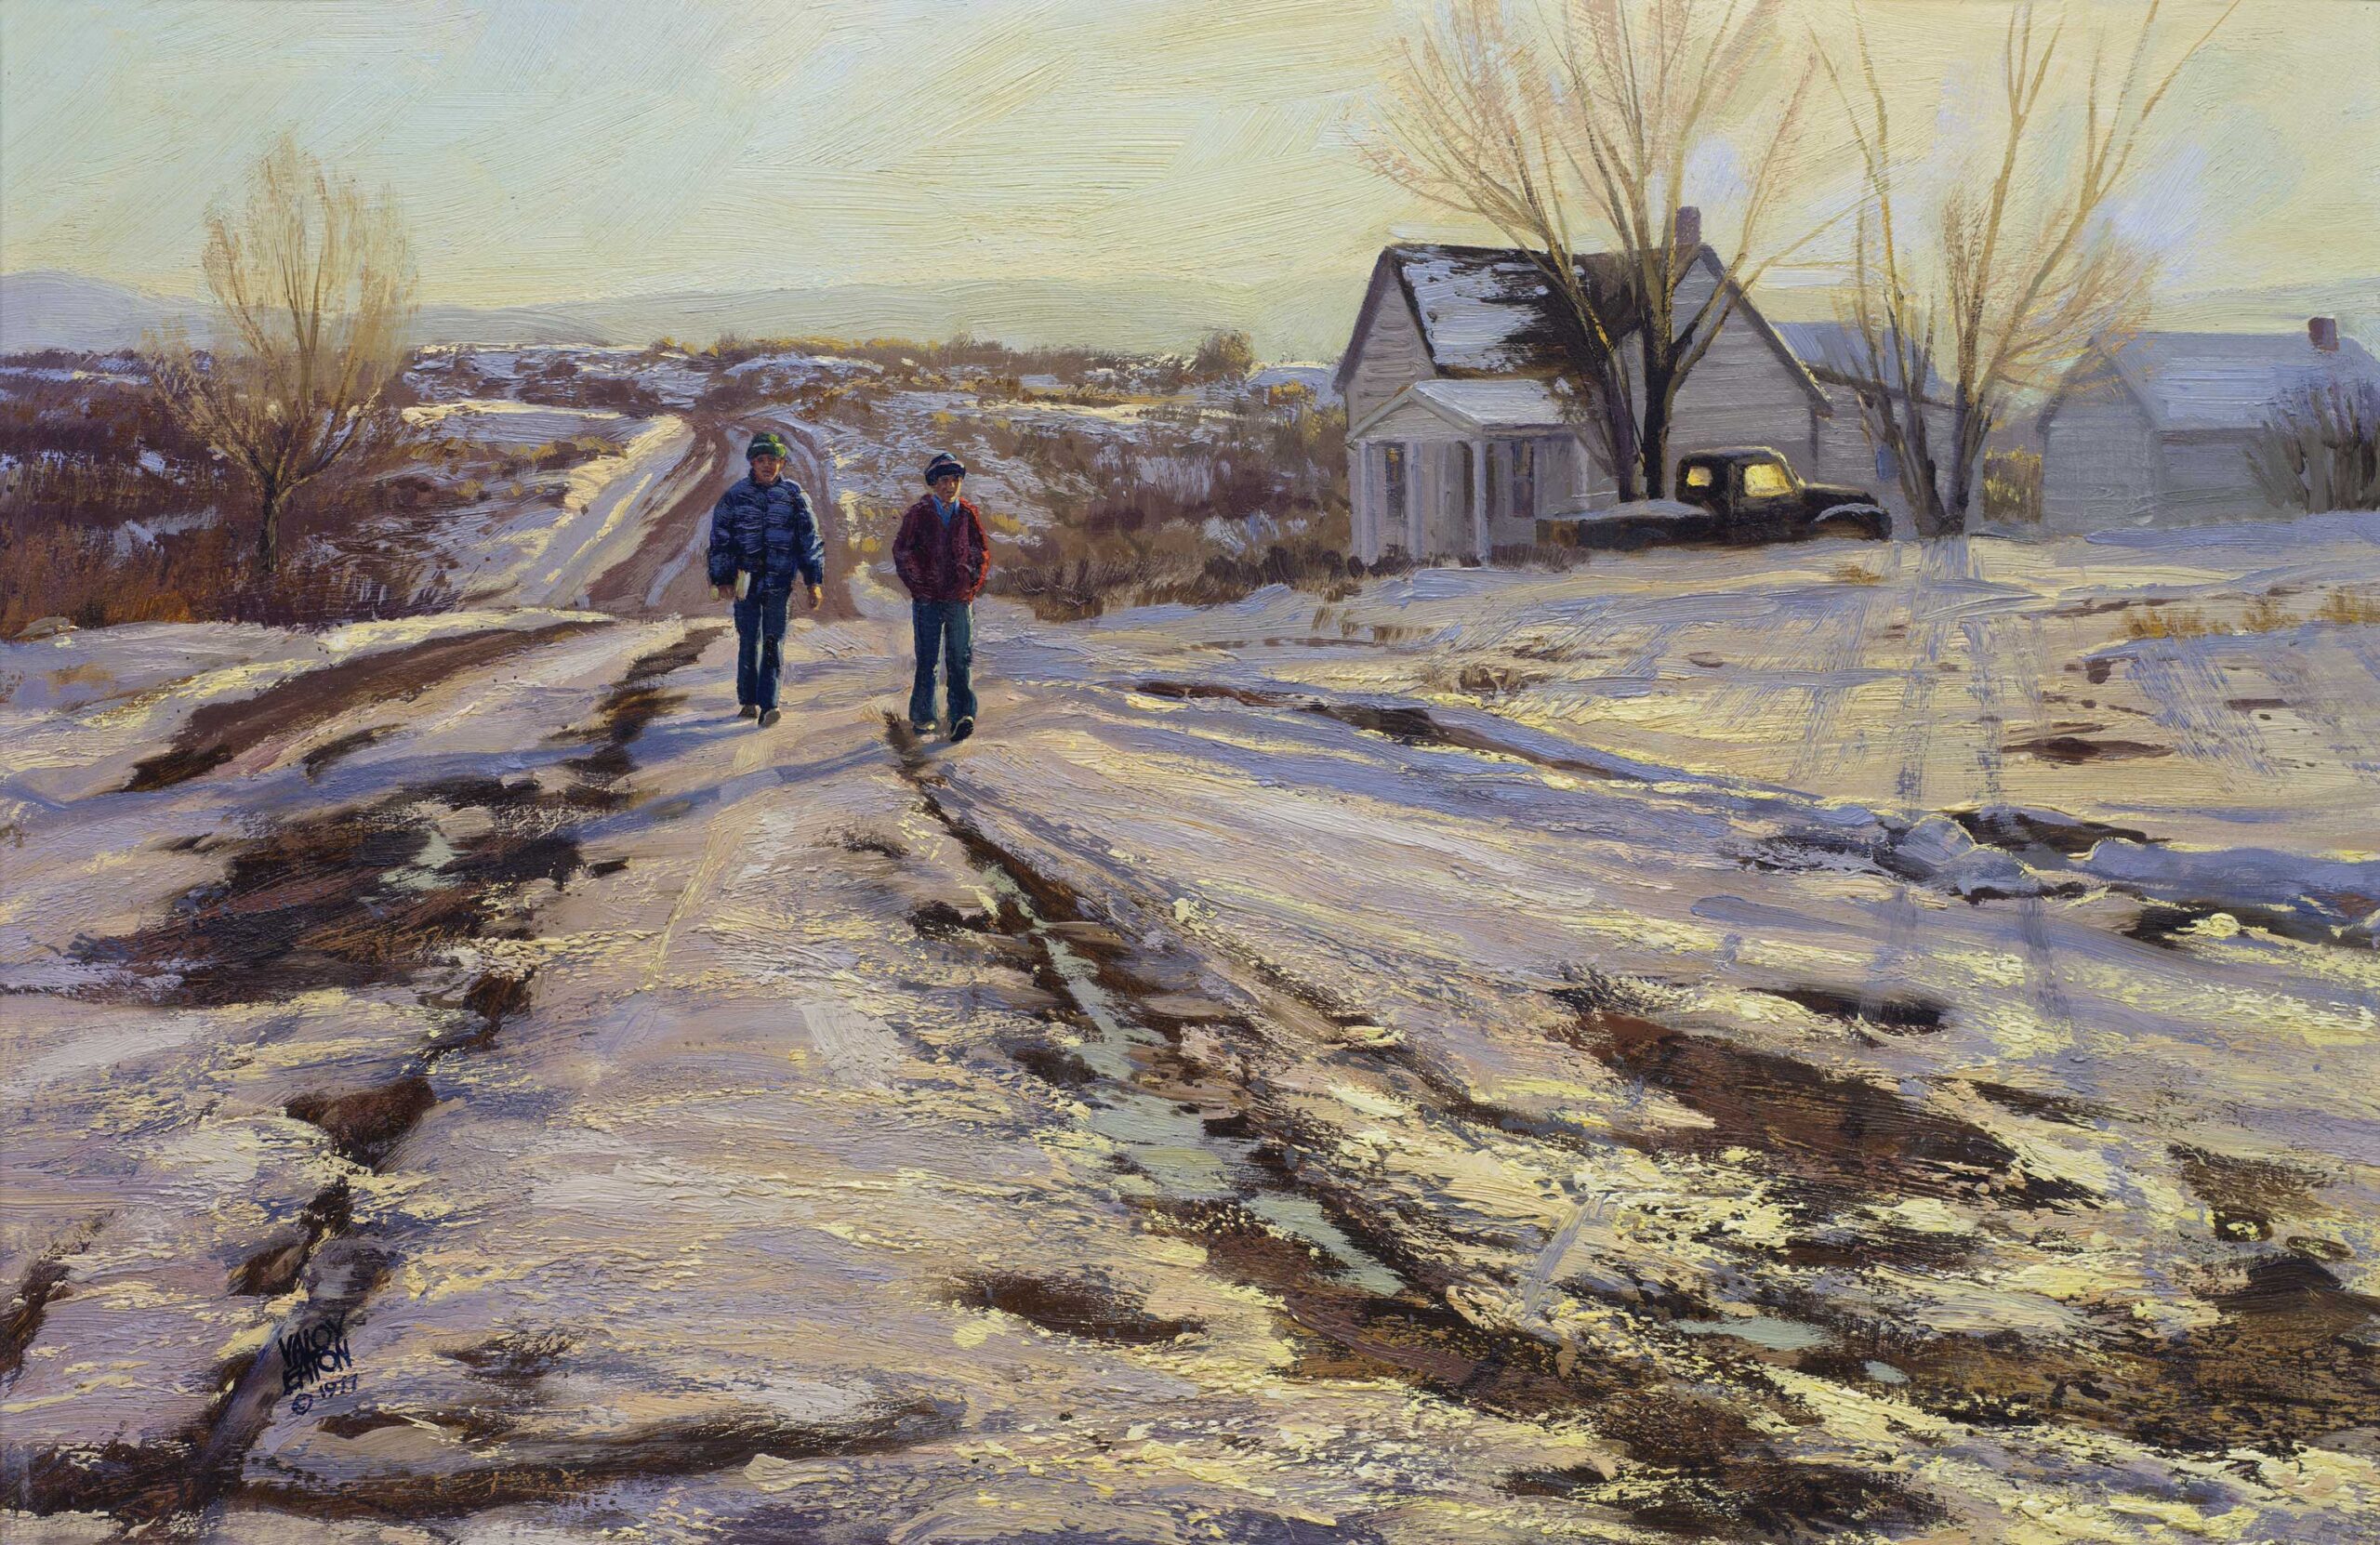 fine art collection - Valoy Eaton (b. 1938), "Home from School," 1985, oil on canvas, 22 x 32 in.